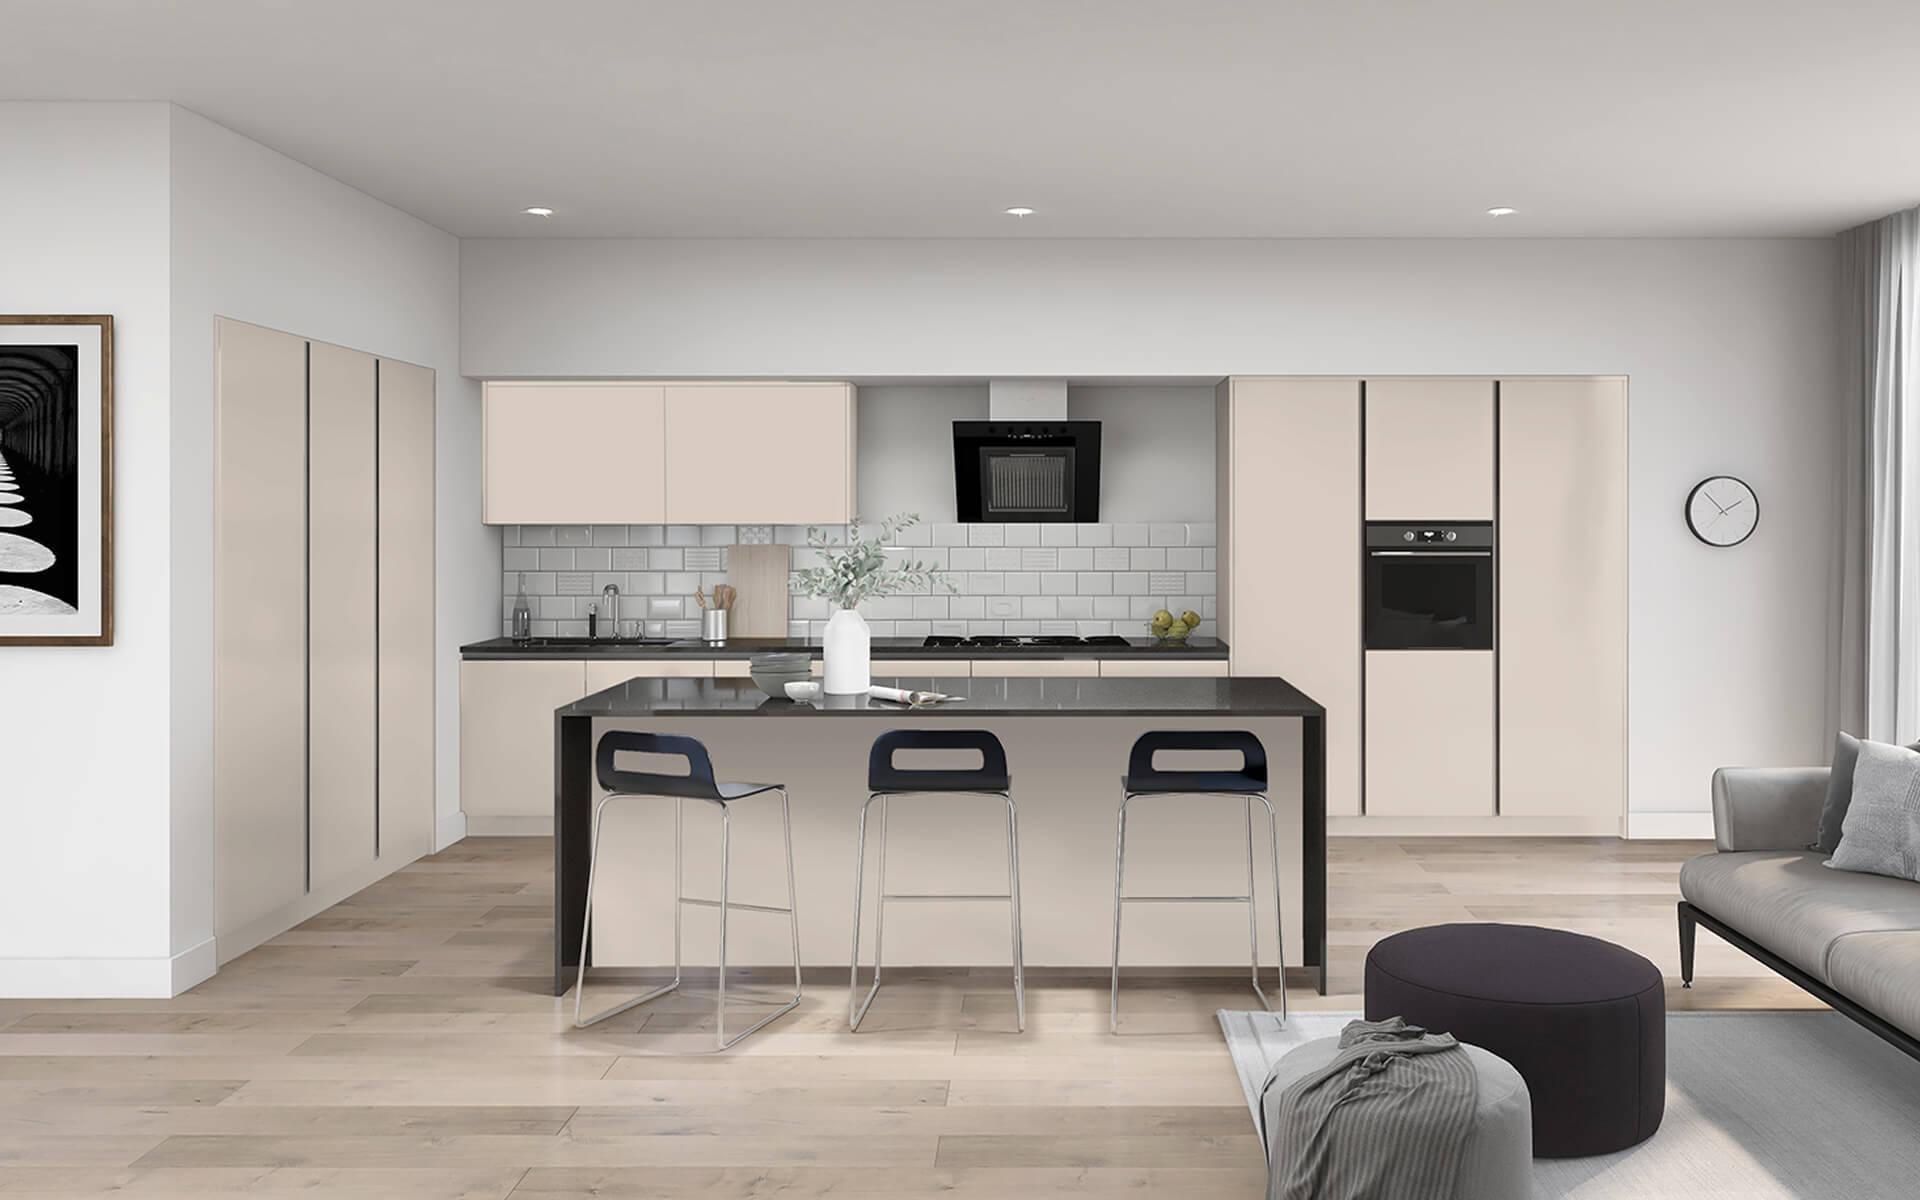 Lucca Kashmir kitchen showing feature island with black worktops, three stools, and tall bank of units with oven